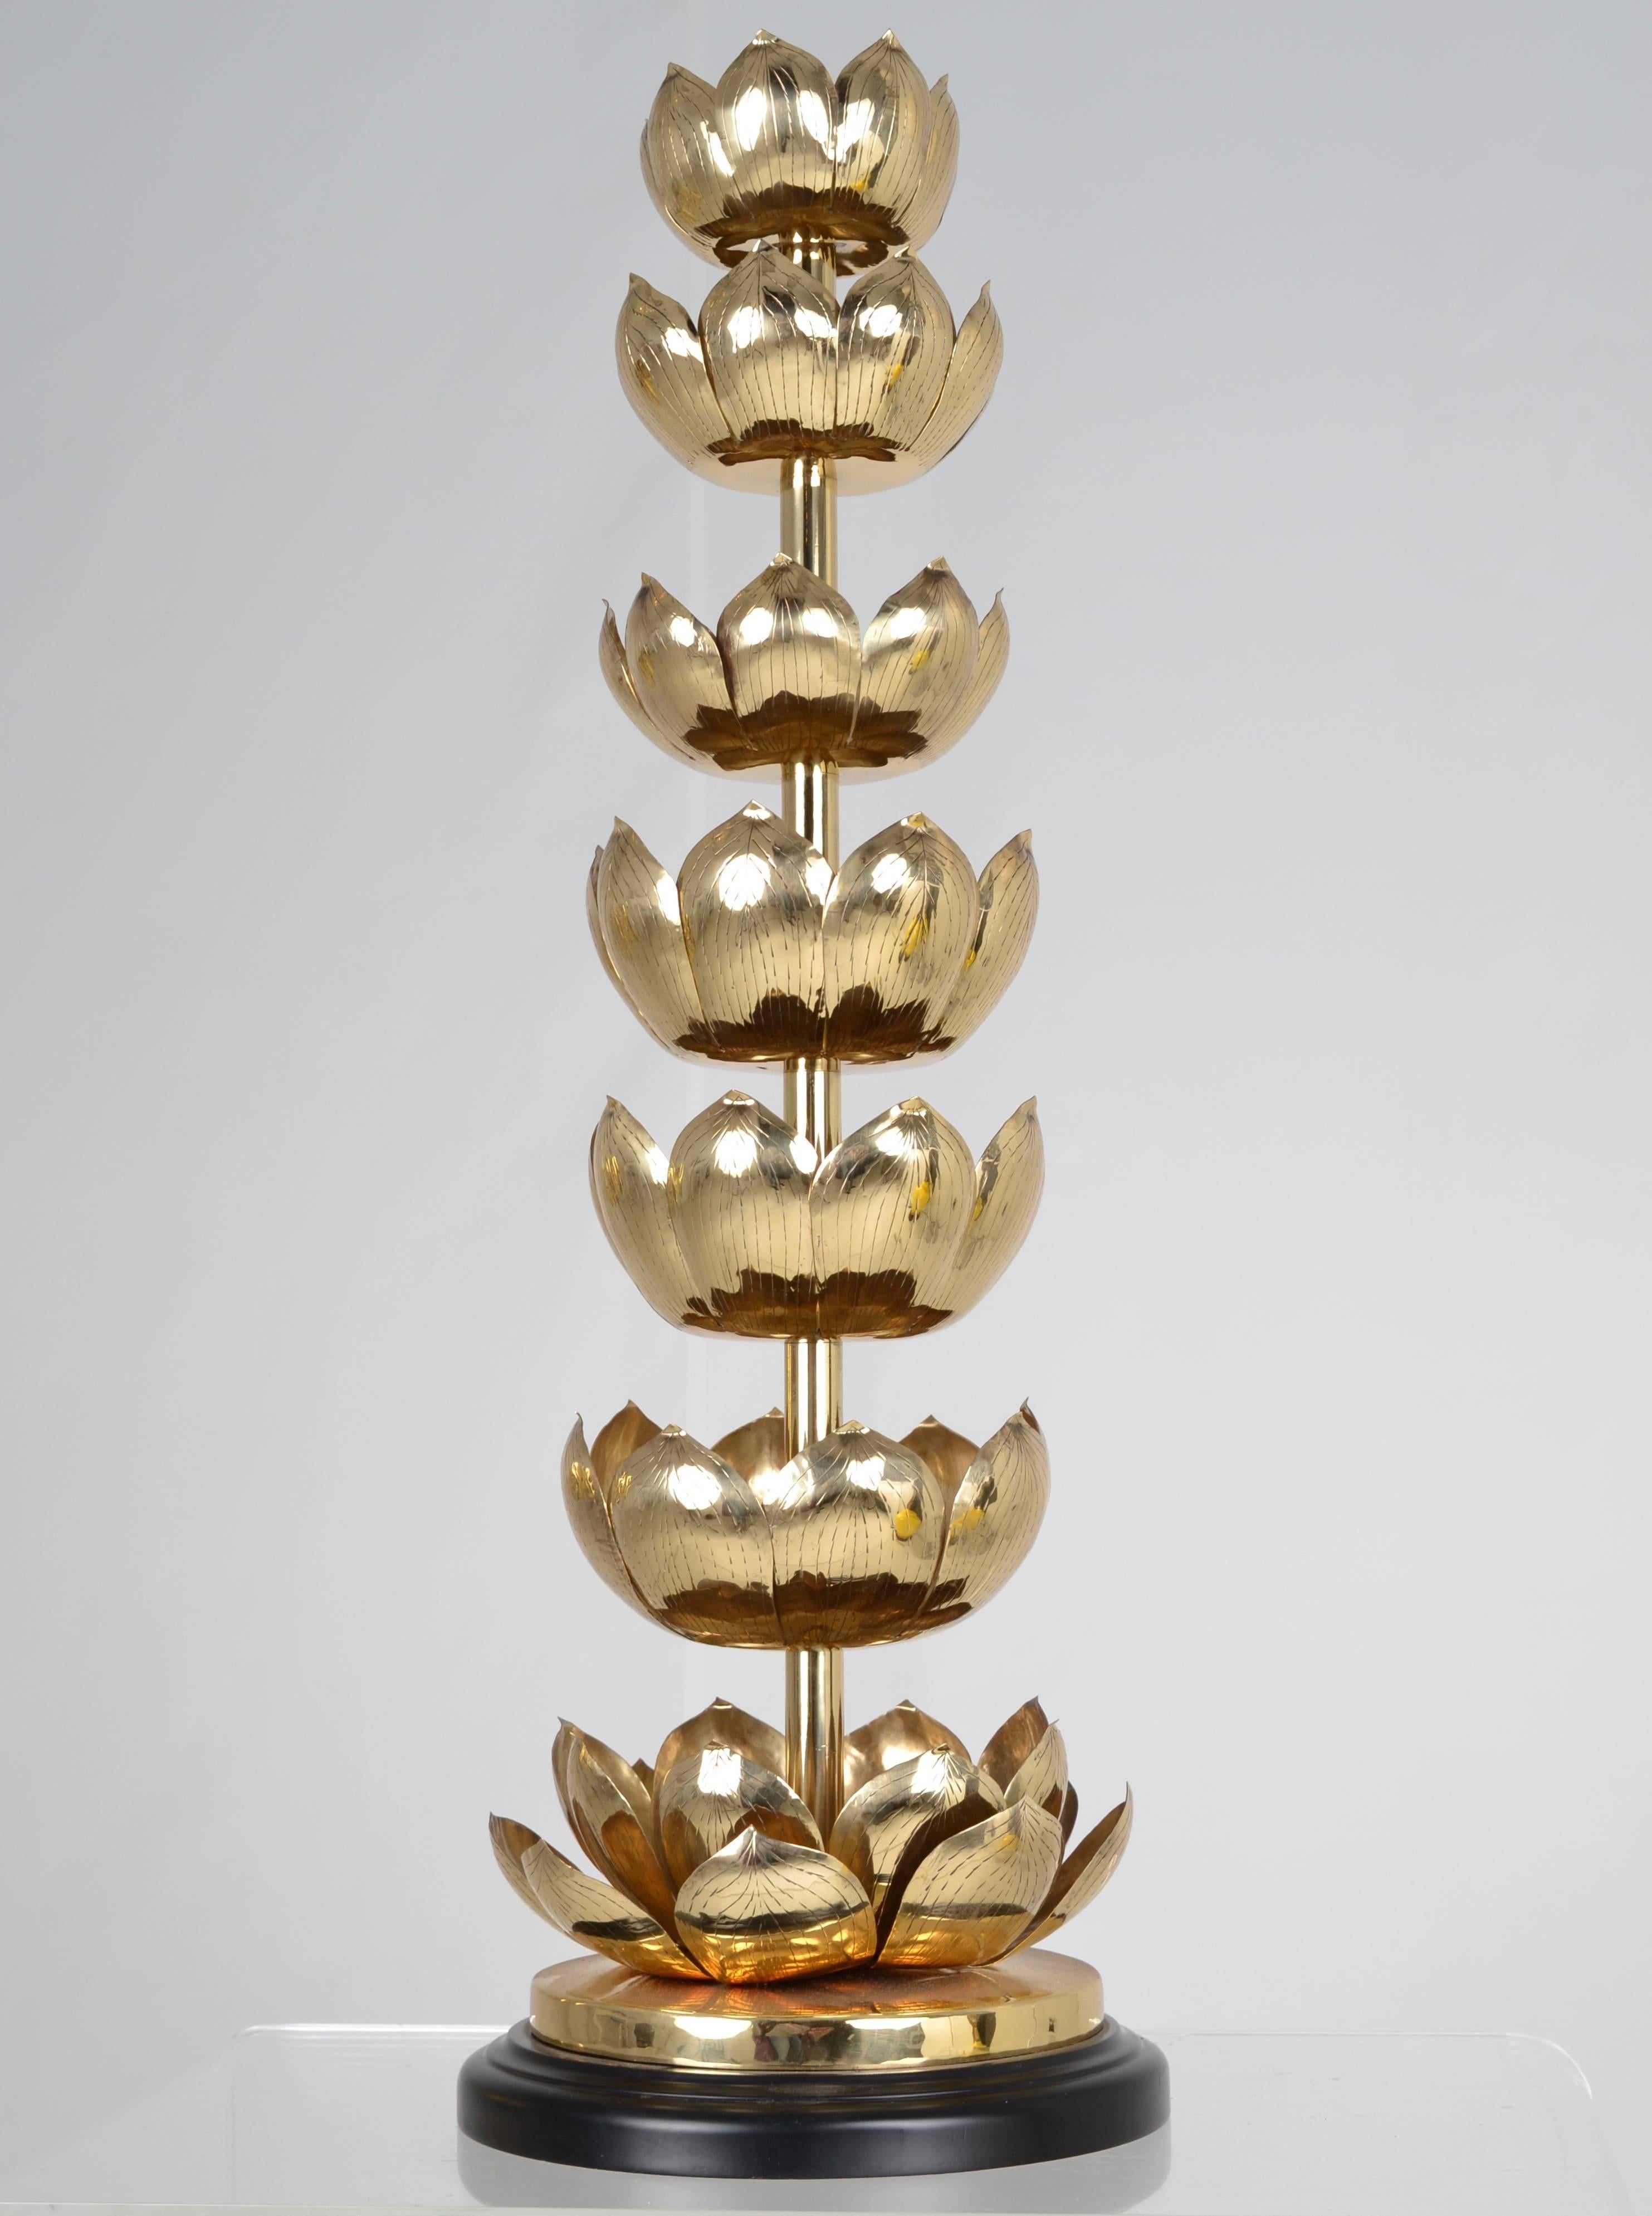 This dramatic candlestick in the Classic lotus flower motif is solid brass, newly polished and lacquered. Simple black base. Great size at 32 inches high and 11 inches diameter.